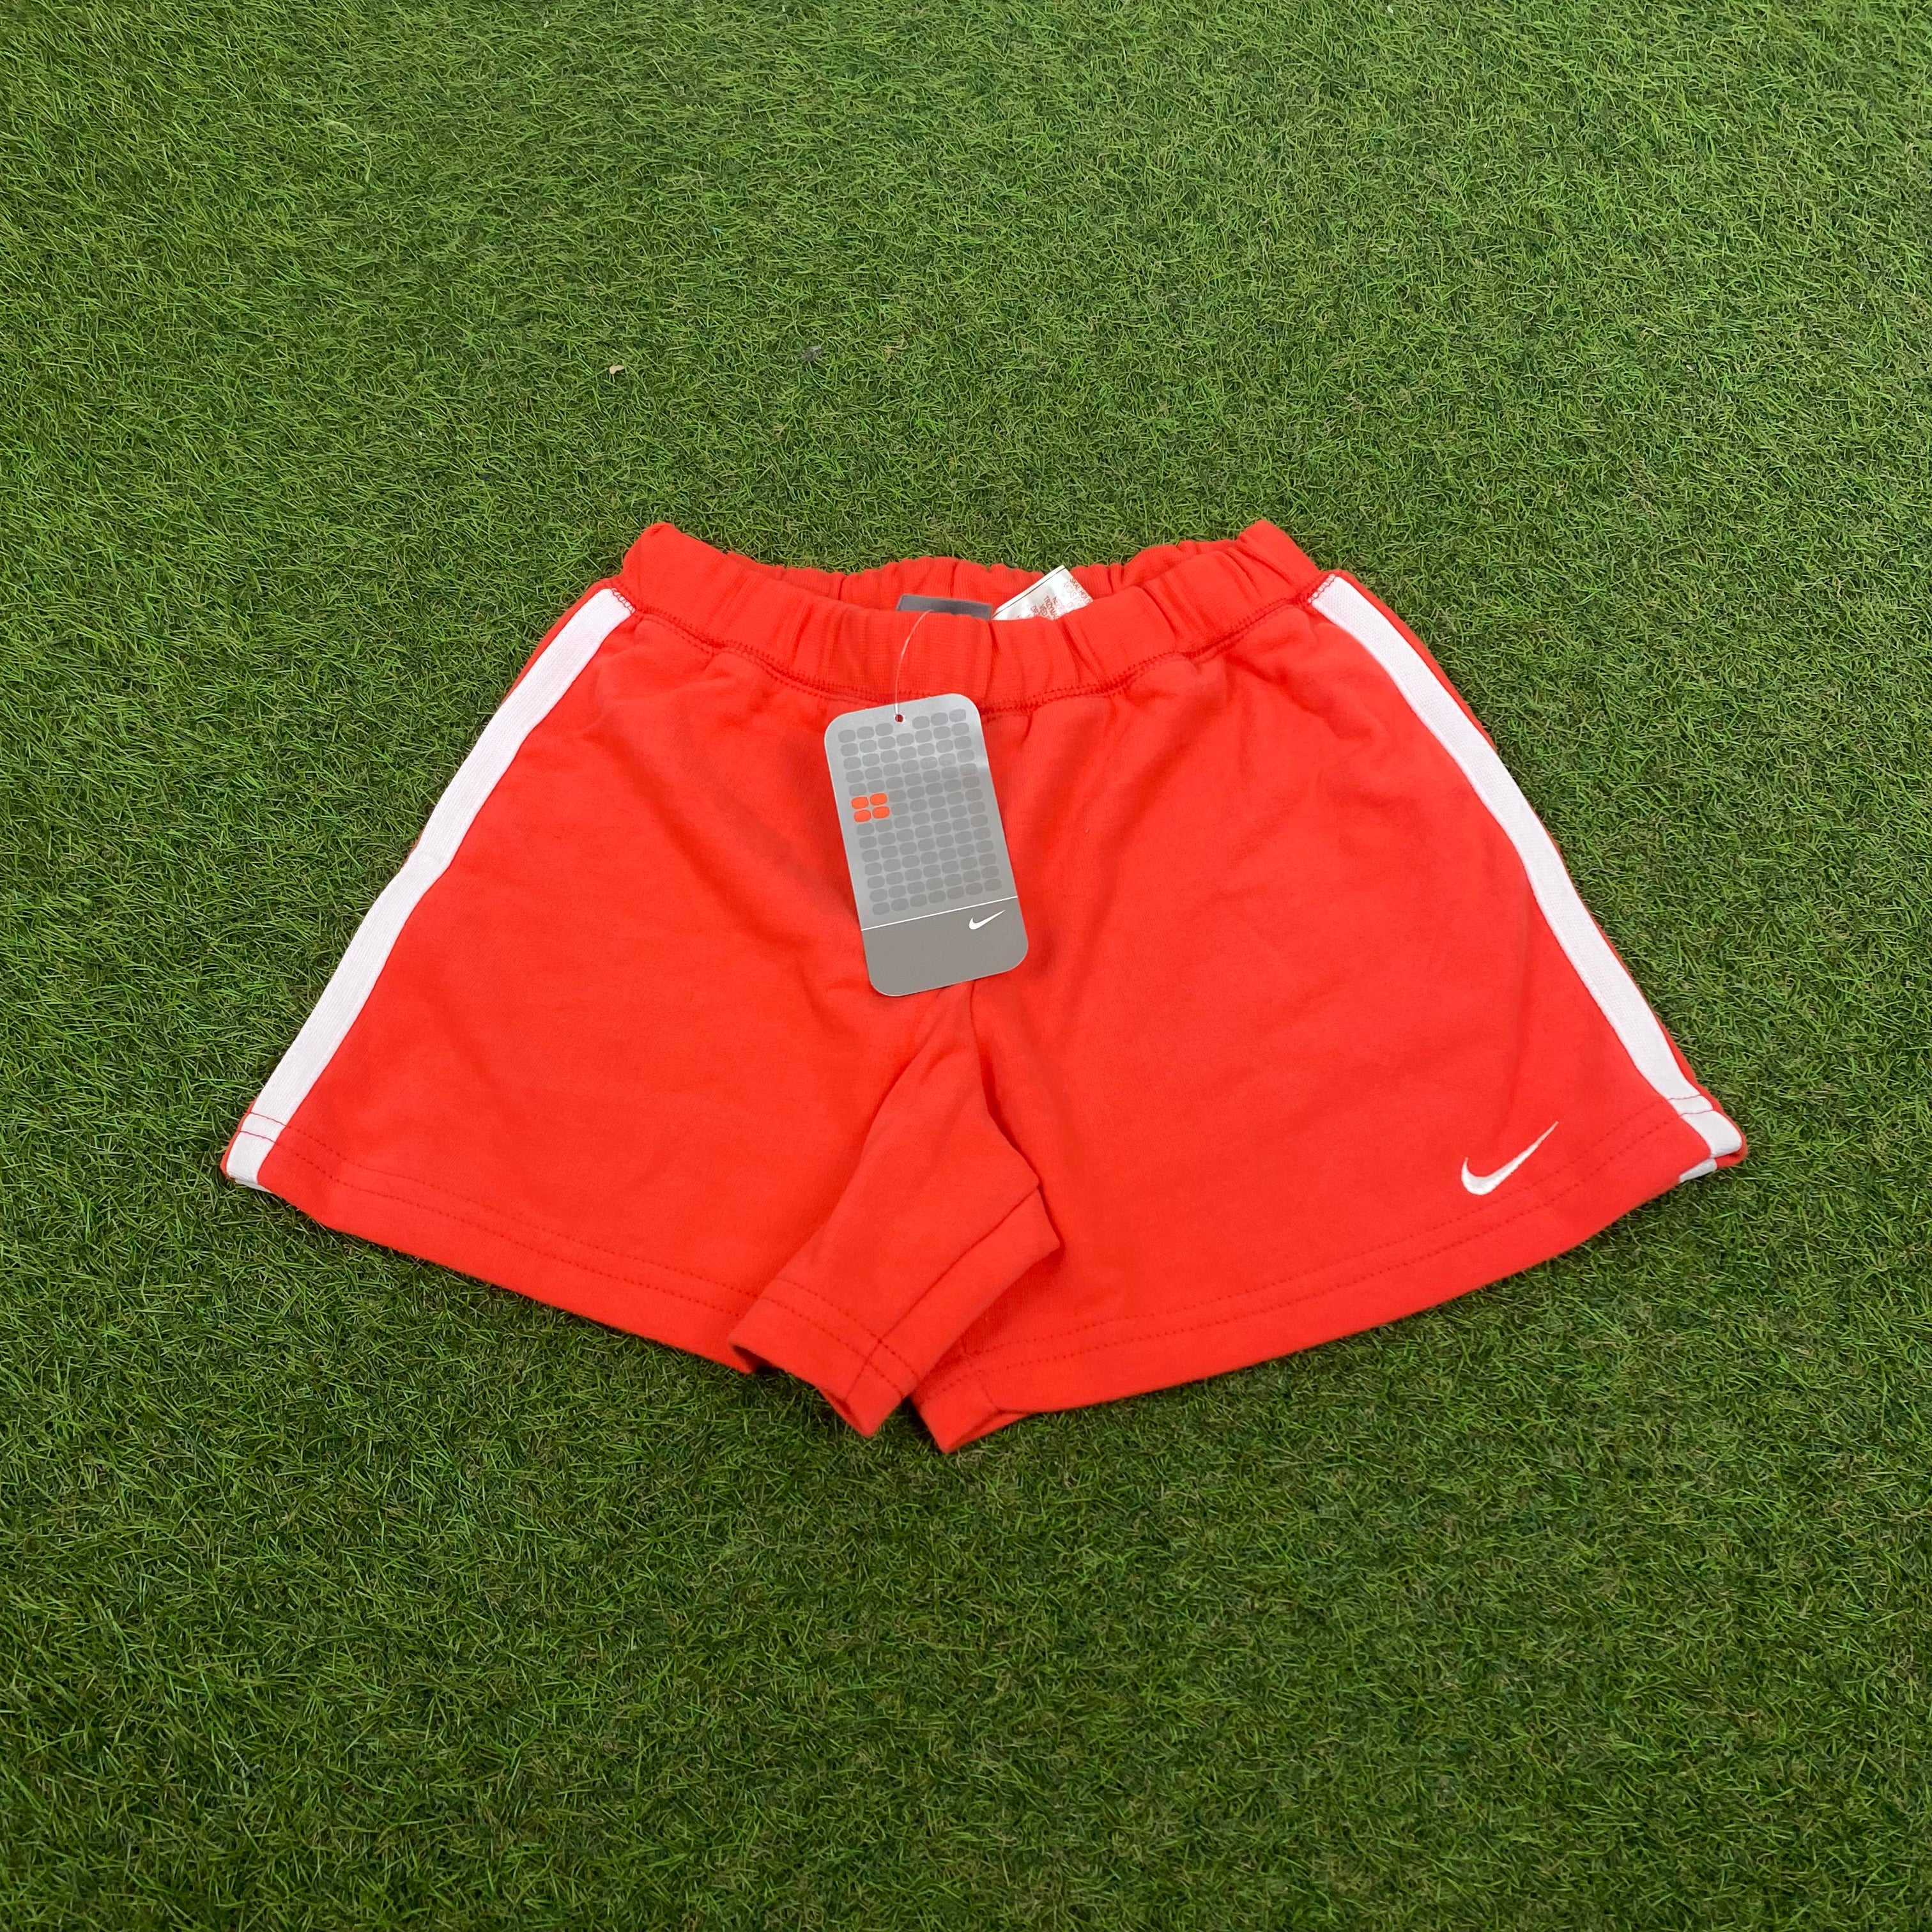 00s Nike Cotton Sprinter Shorts Red XS